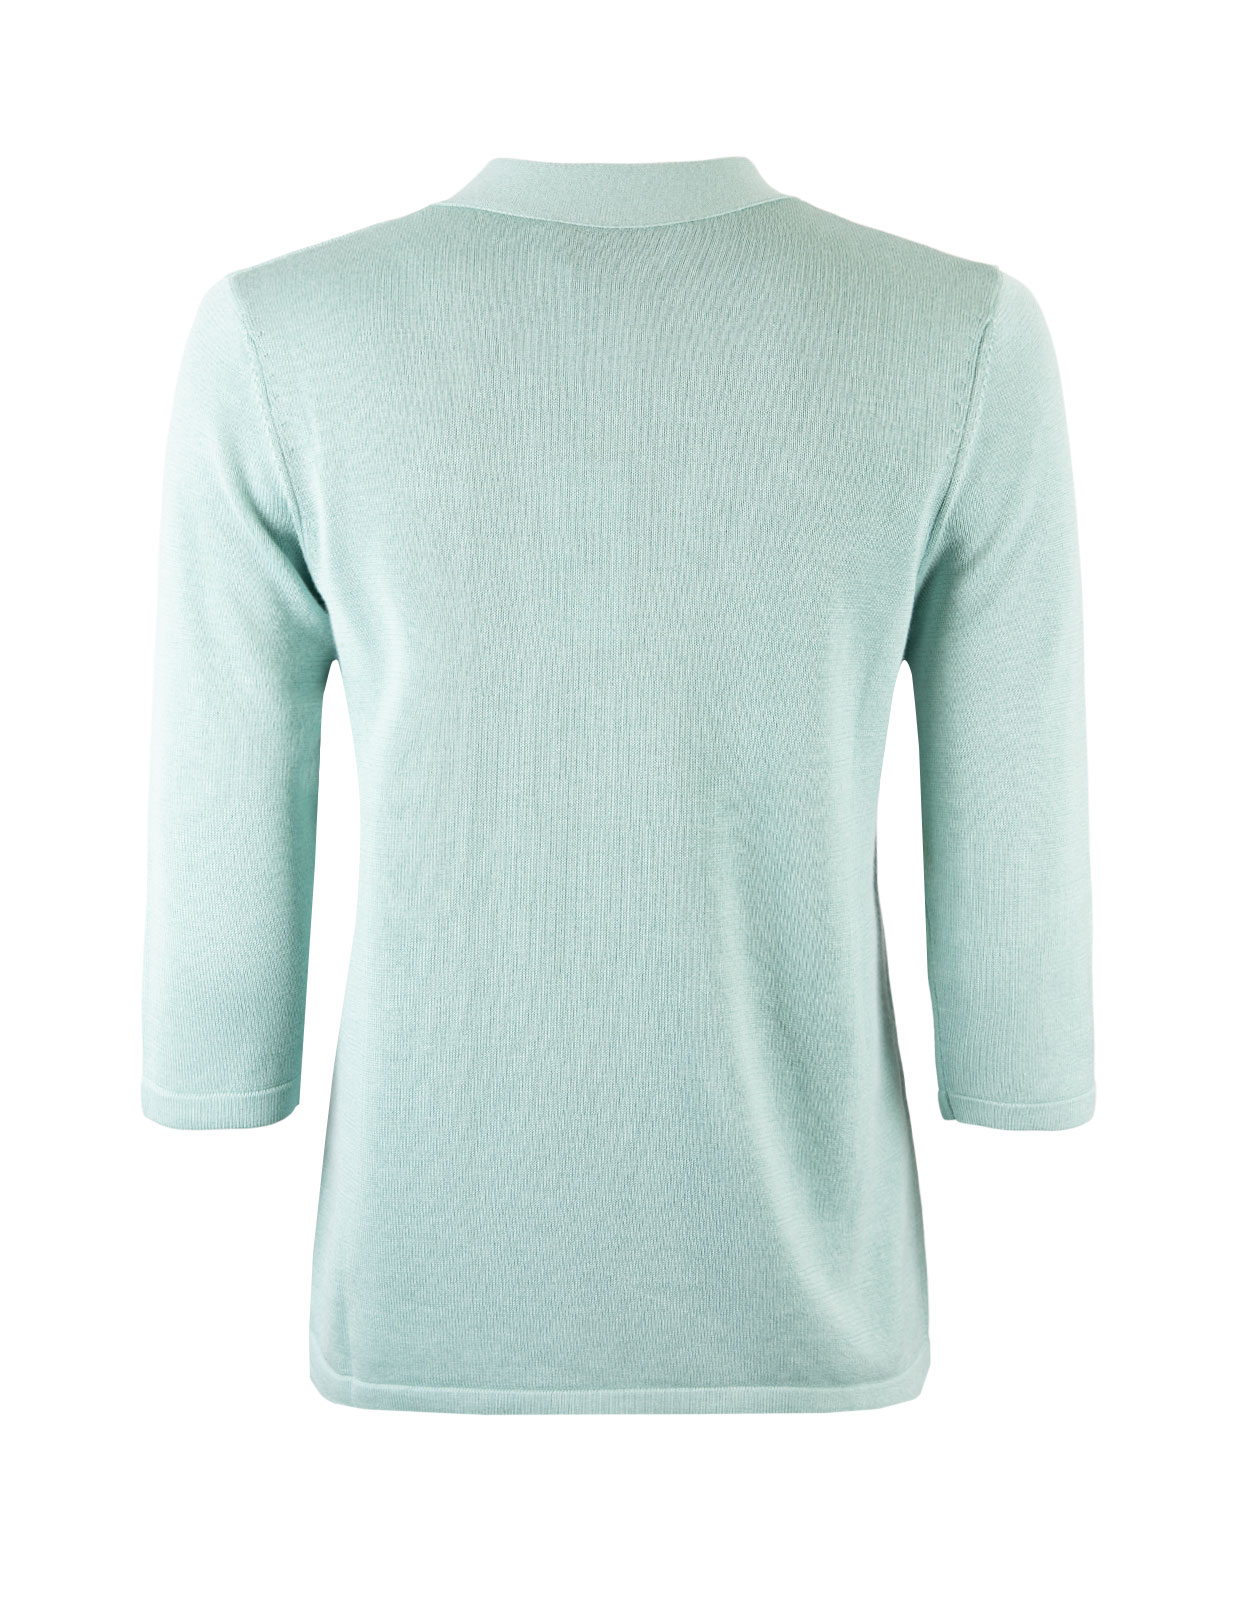 Stella Top With Bow Minty